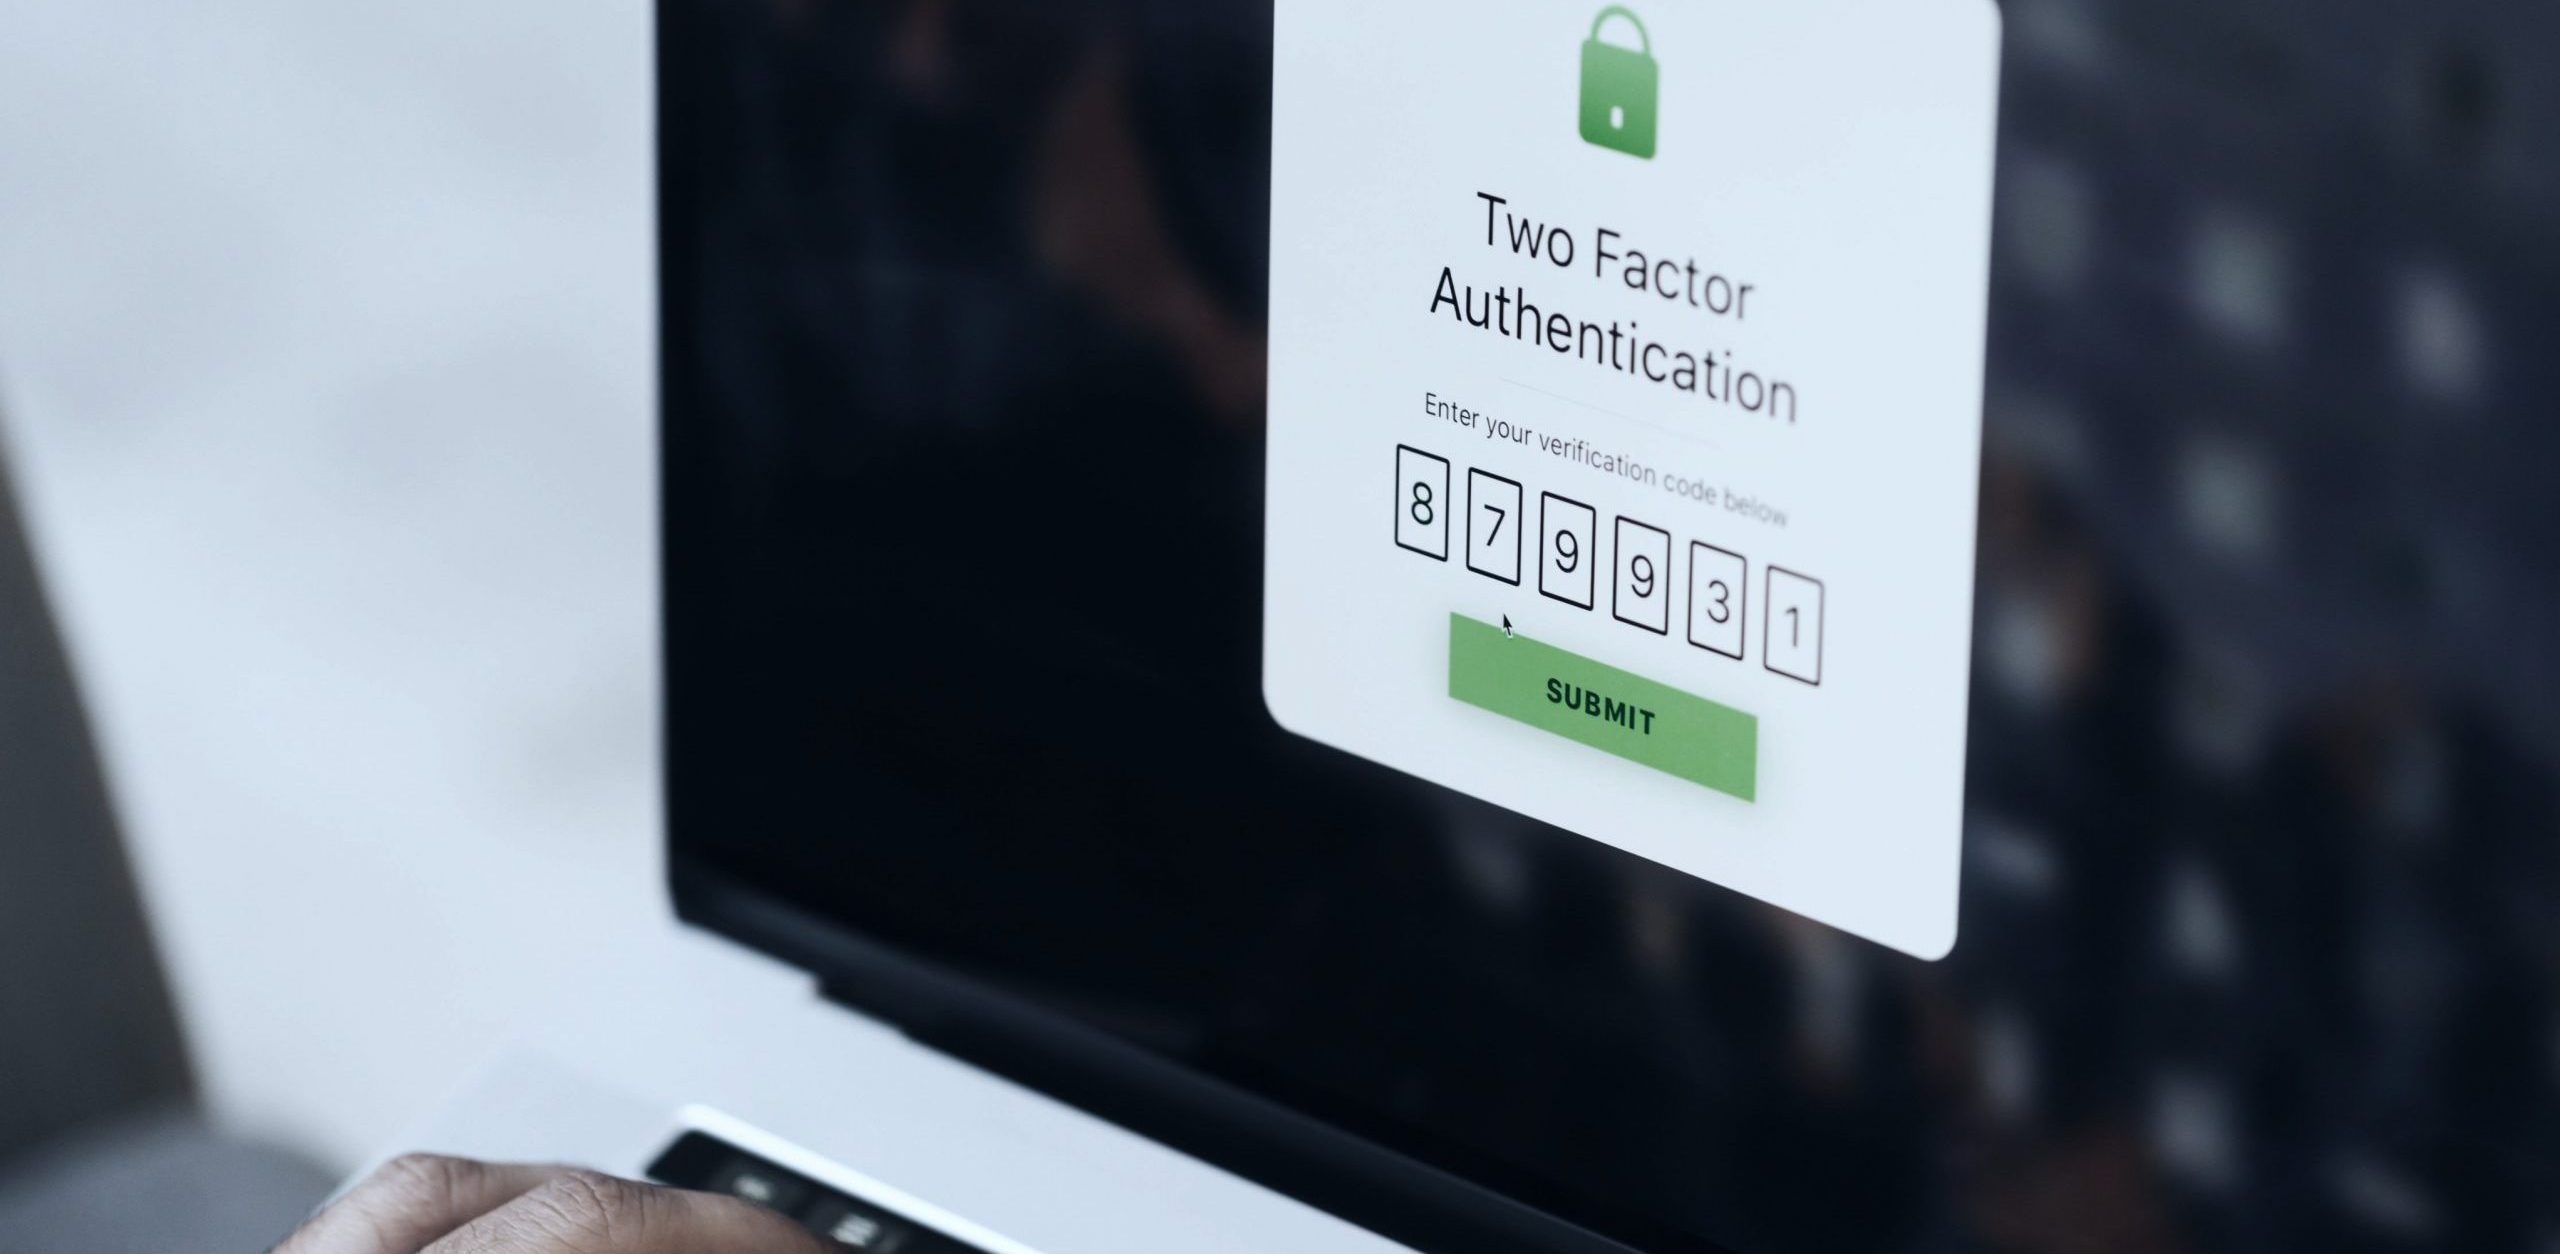 Authentication code on screen